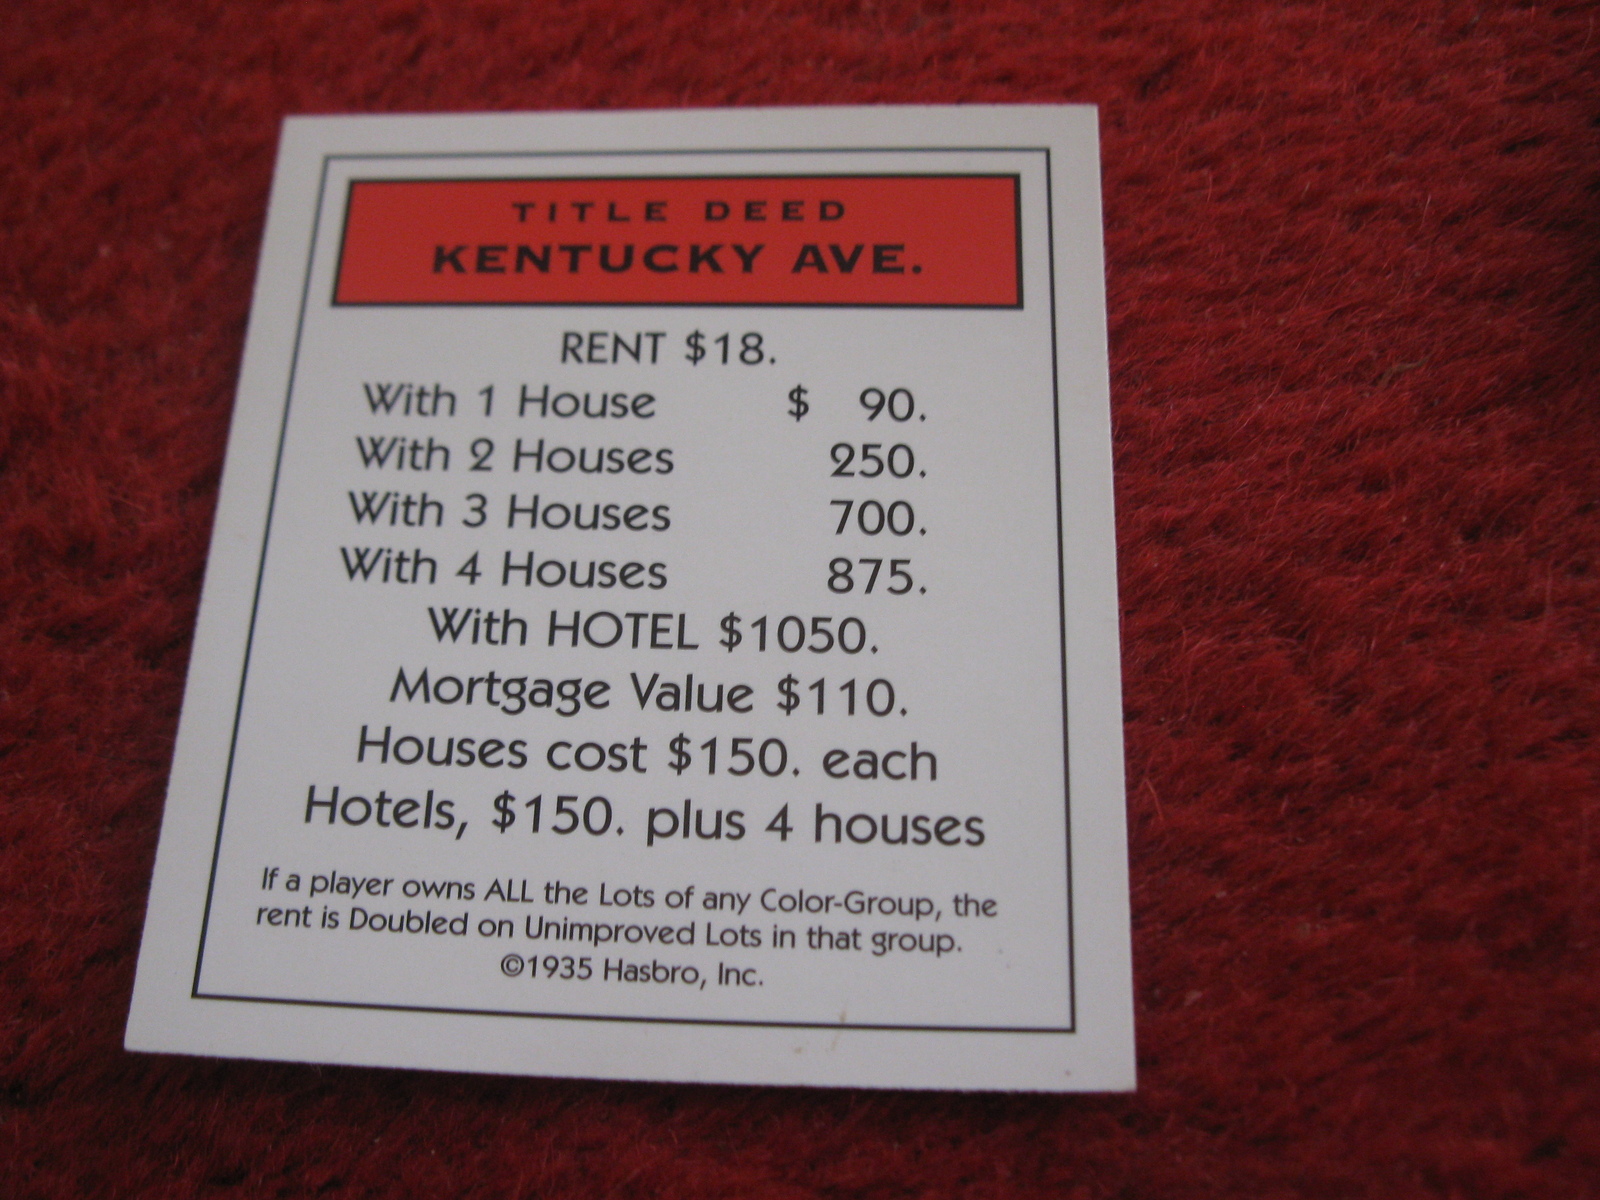 Primary image for 2004 Monopoly Board Game Piece: Kentucky Title Deed